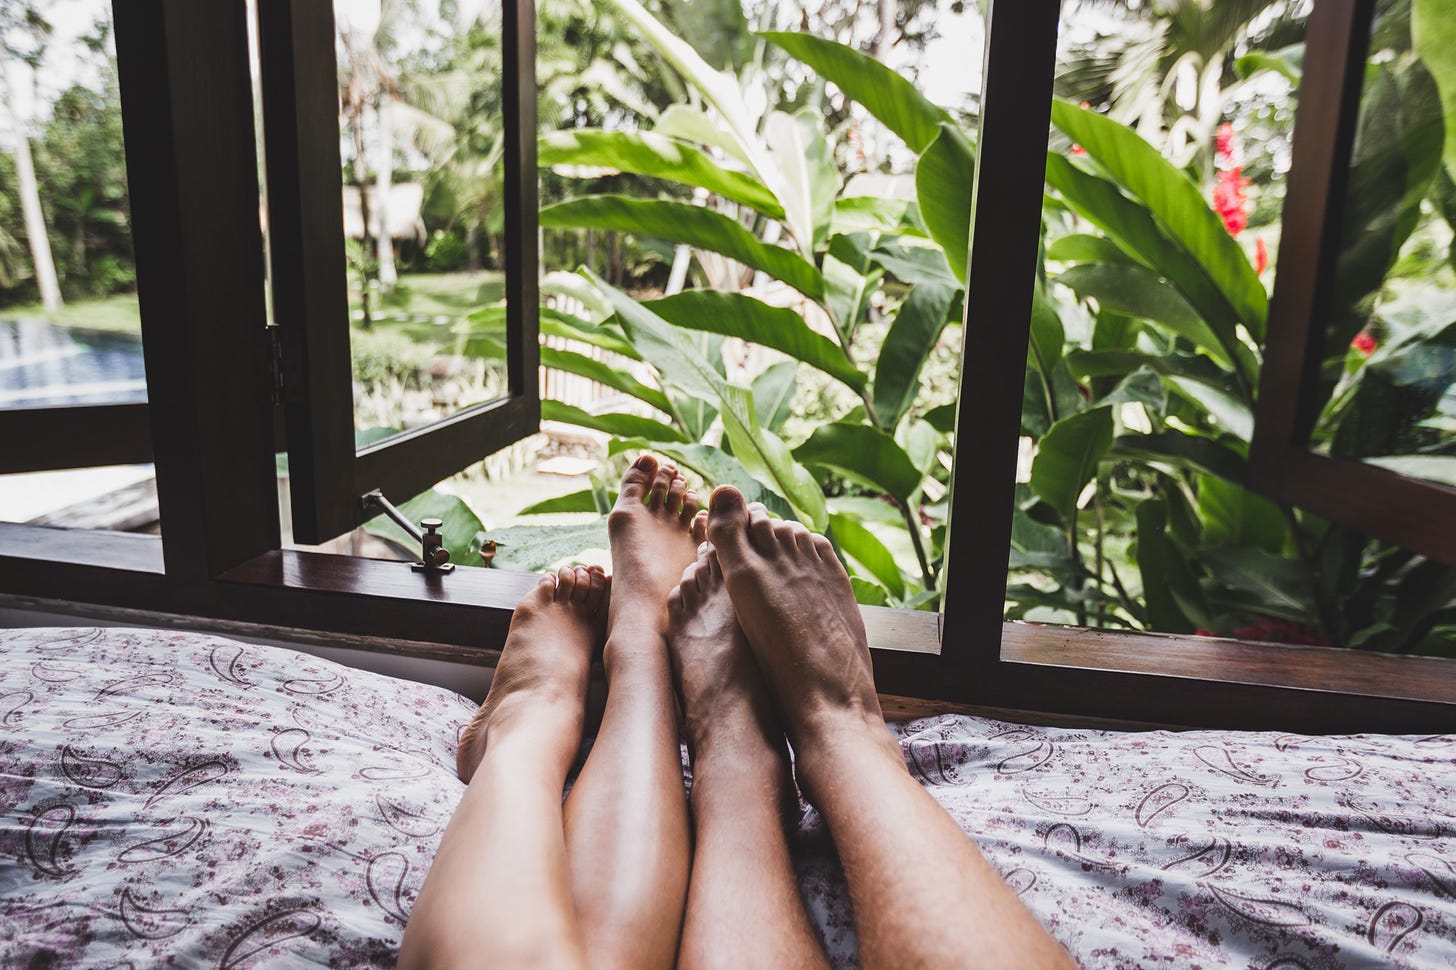 A couple in lies in bed with their legs on the edge of a window looking into the garden.